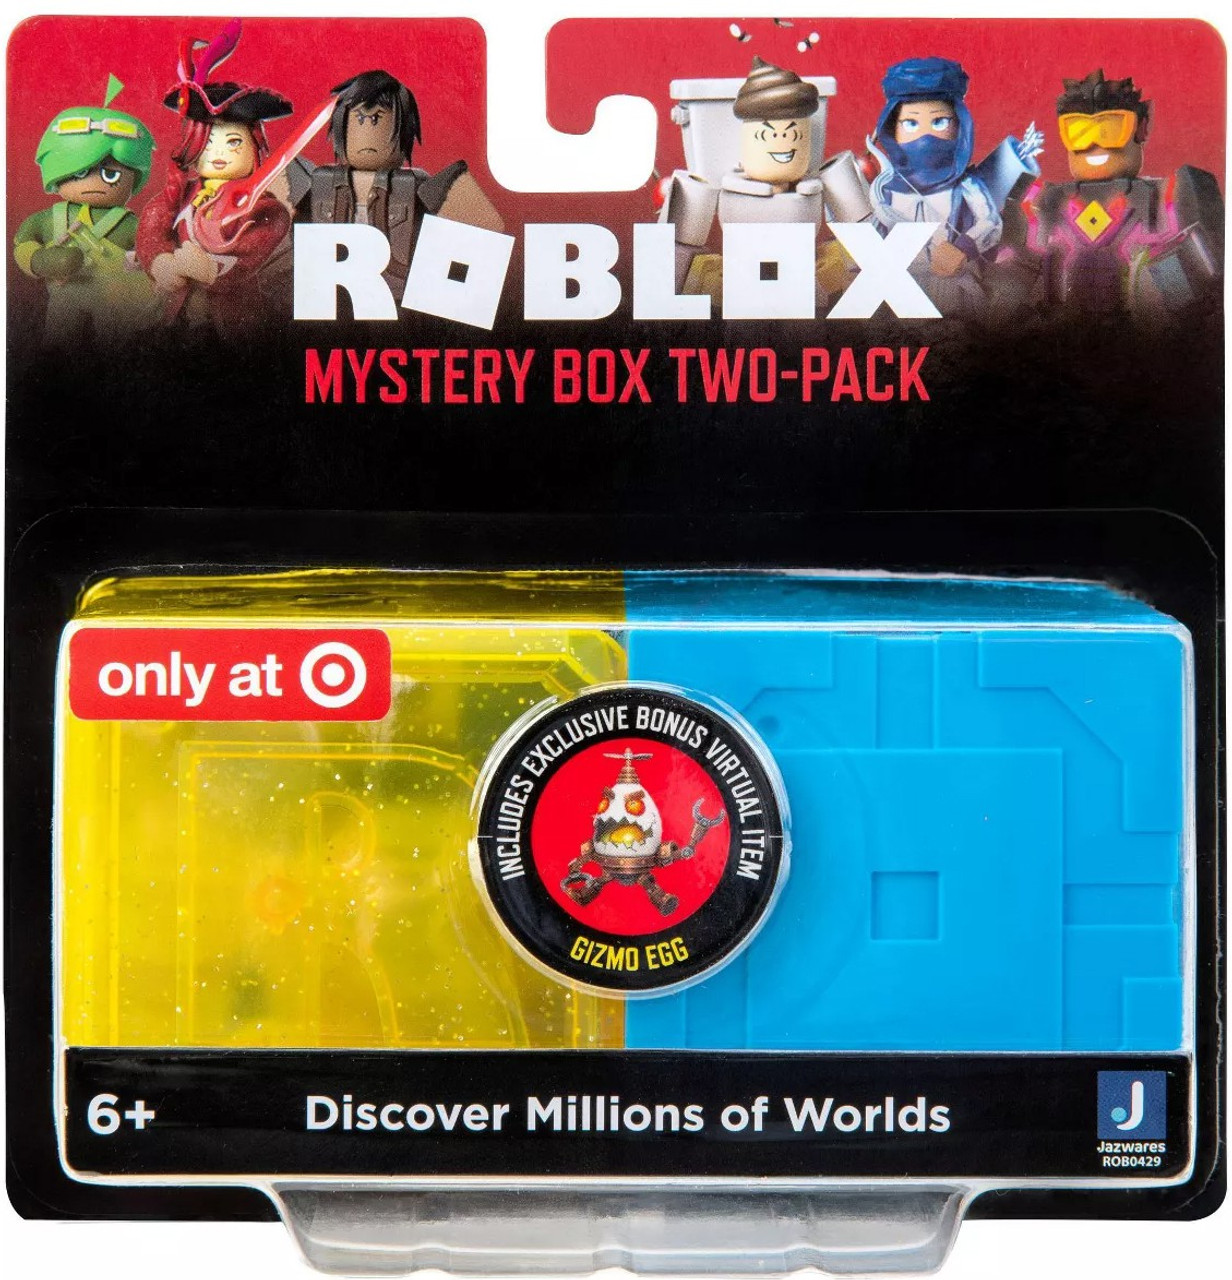 Roblox Series 9 Celebrity Series 7 Exclusive Mystery 2 Pack Easter Set Bonus Gizmo Egg Virtual Item Code Included Jazwares Toywiz - roblox harley quinn outfit code